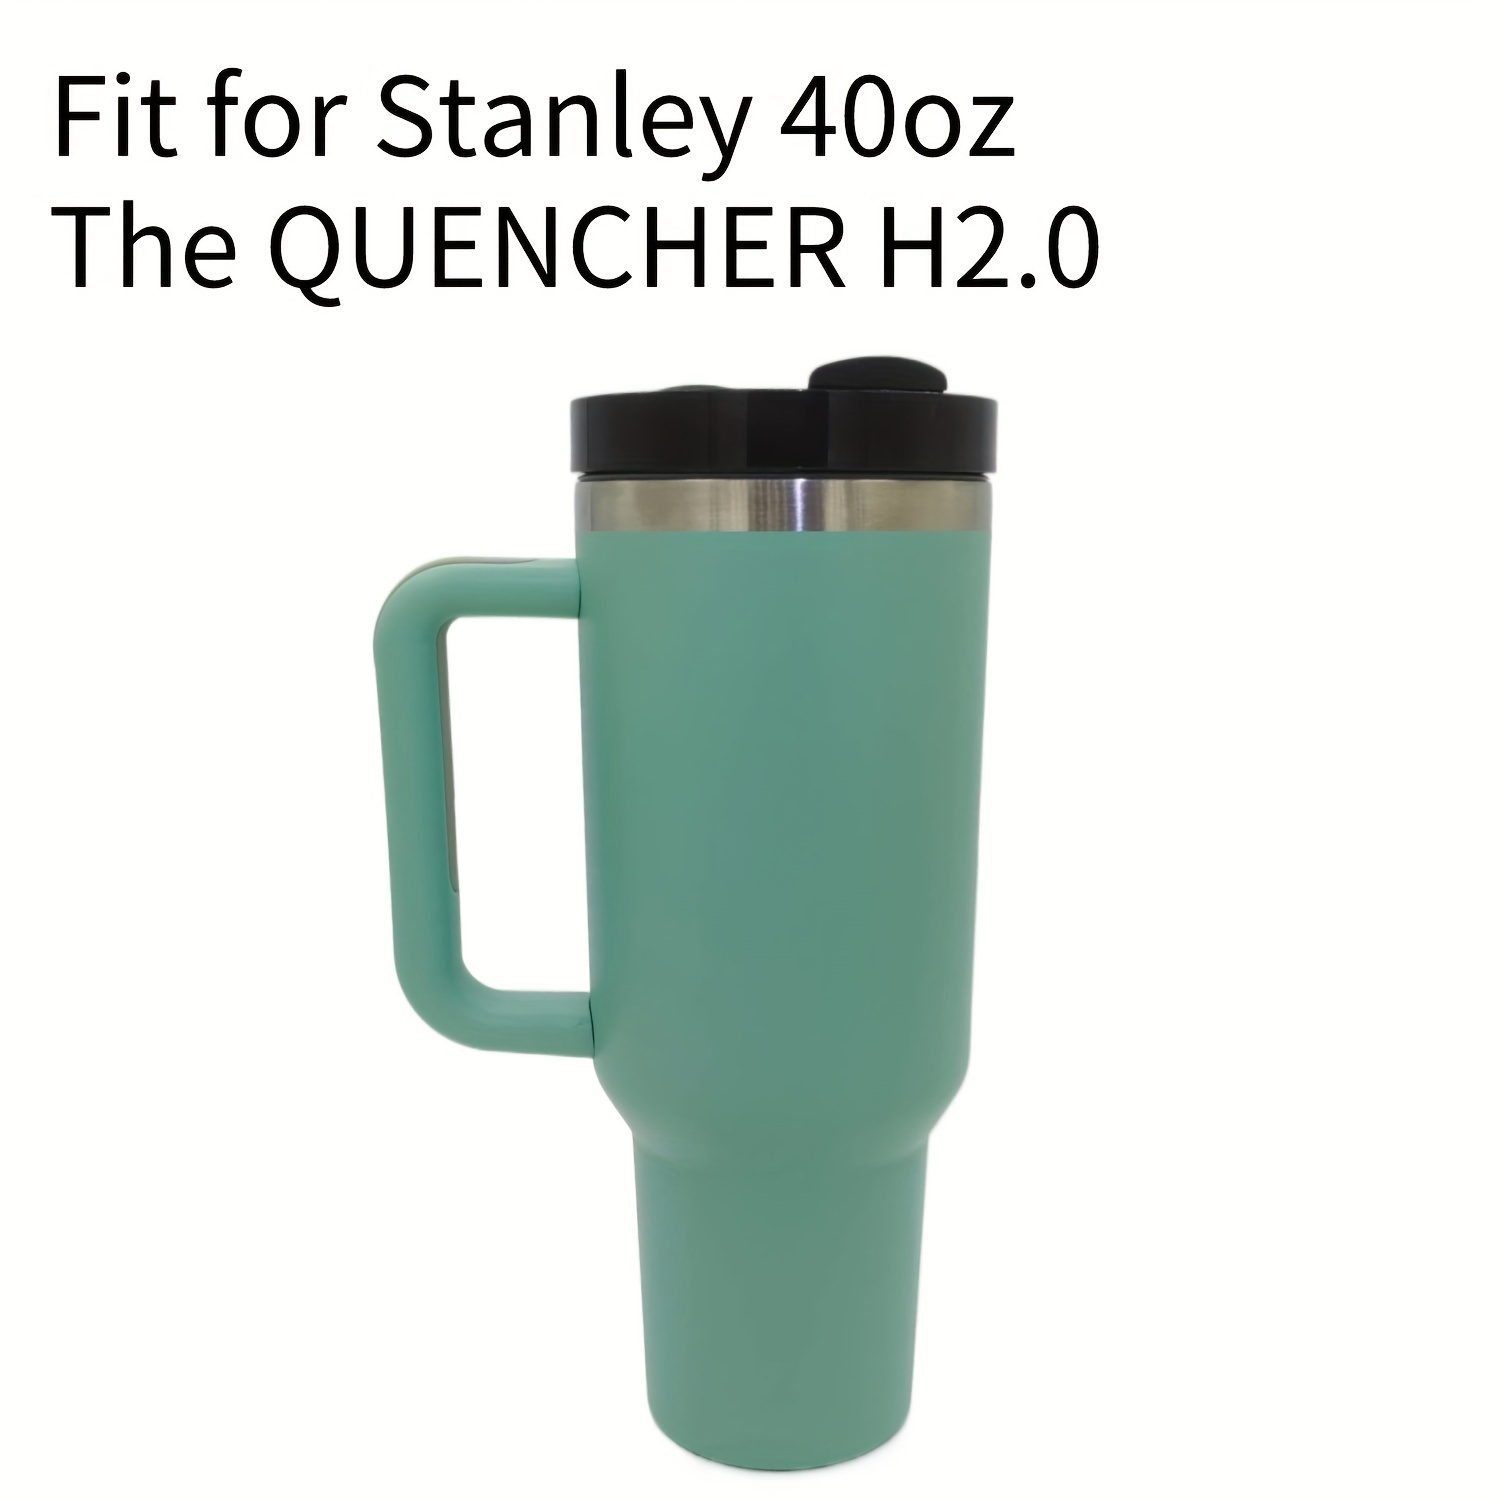 Replacement Lids for Stanley 40oz Tumbler Cups Quencher H2.0